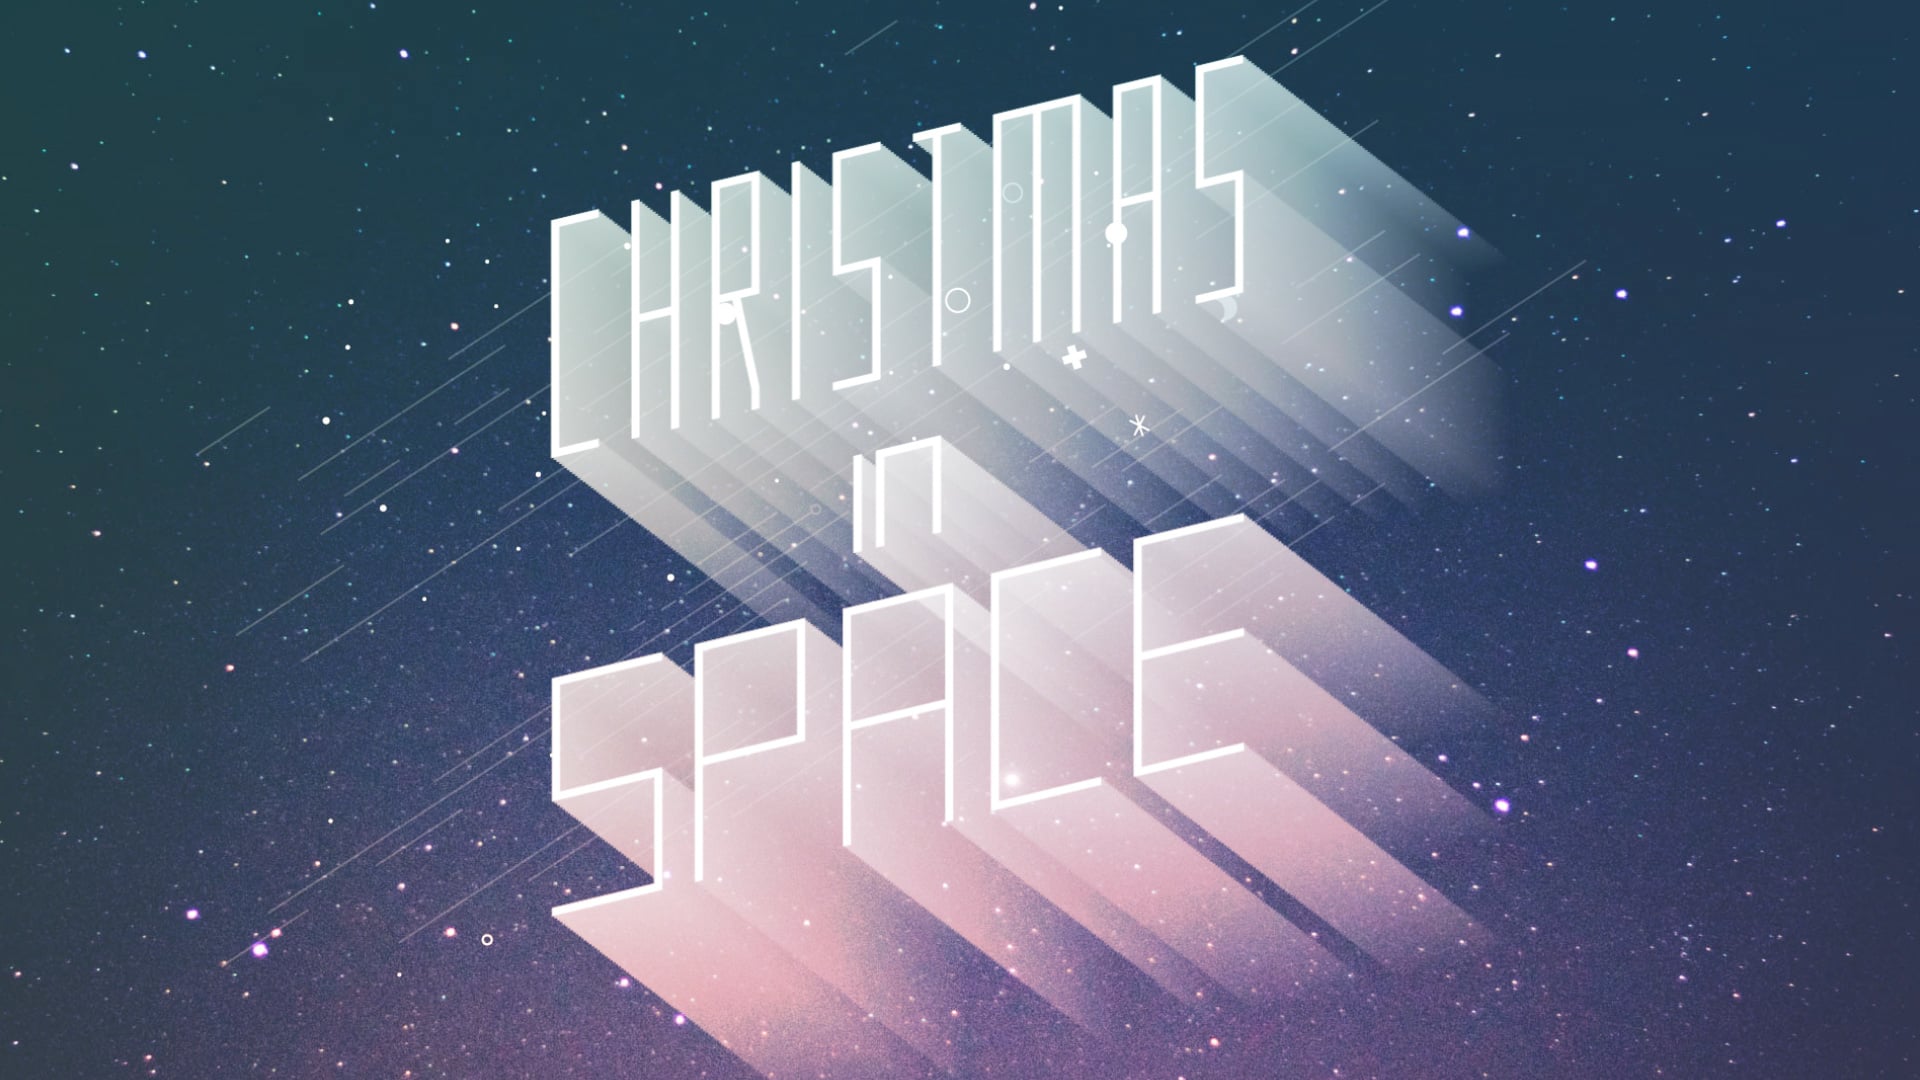 Christmas in Space!